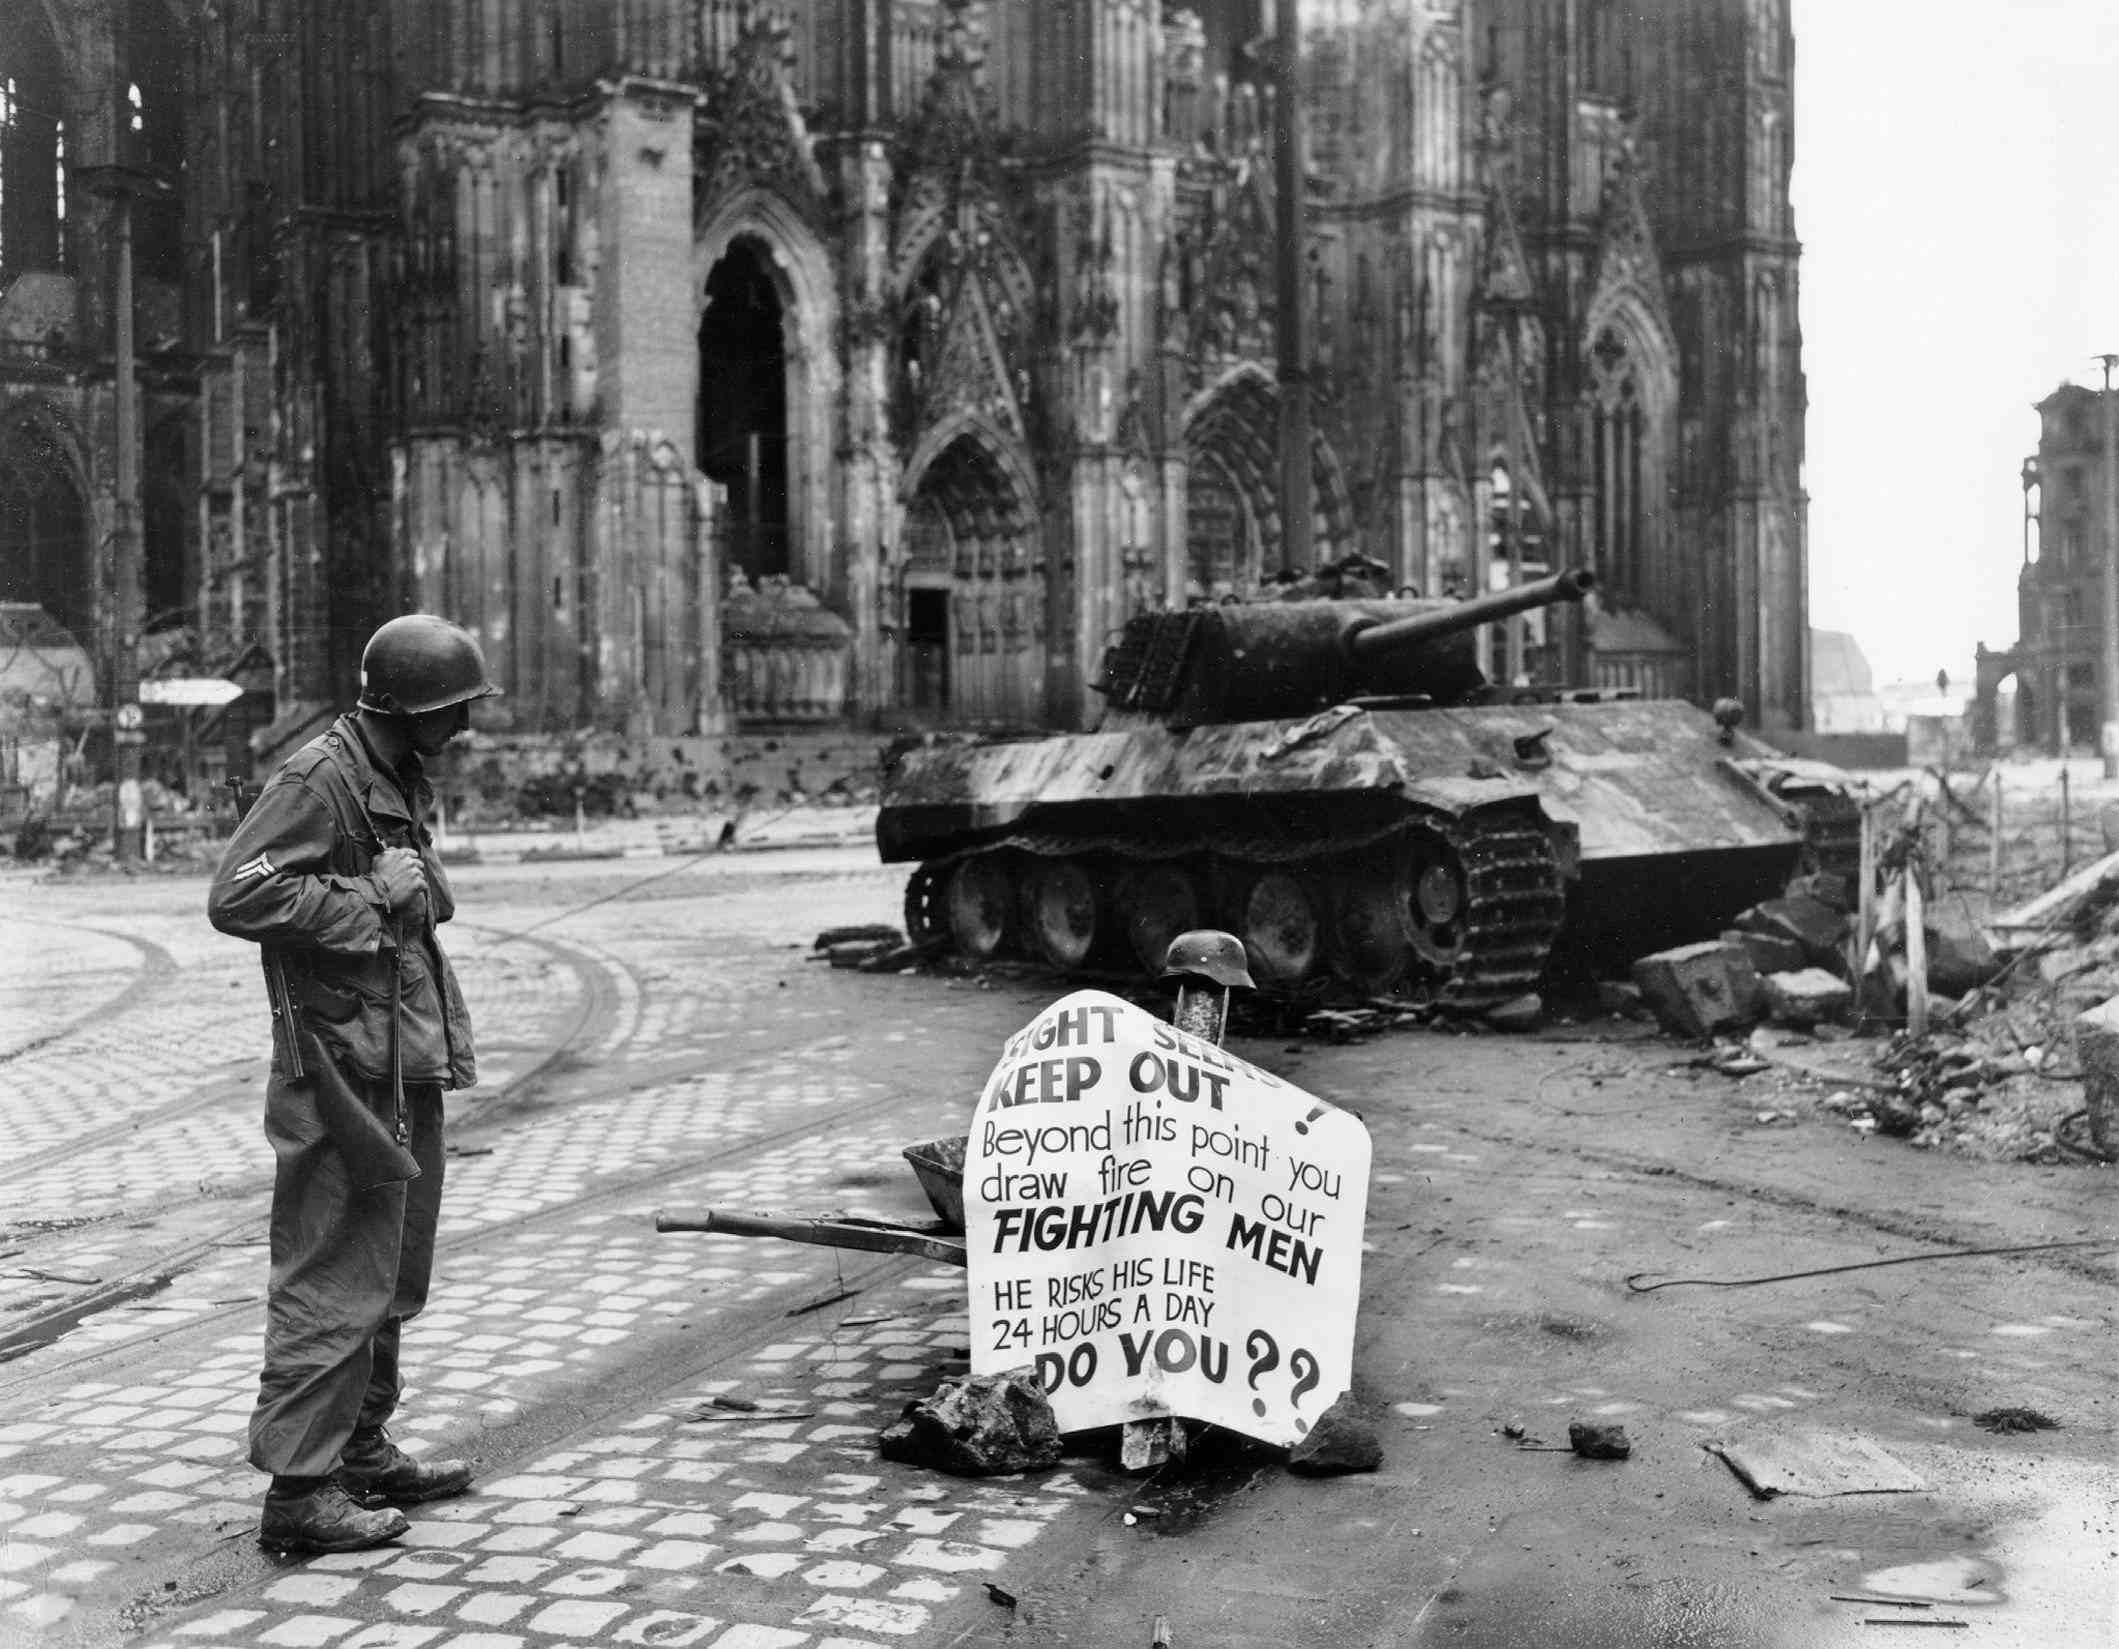 Corporal Luther E. Boger of US 82nd Airborne Division reading a warning sign, Cologne, Germany, 4th April 1945.